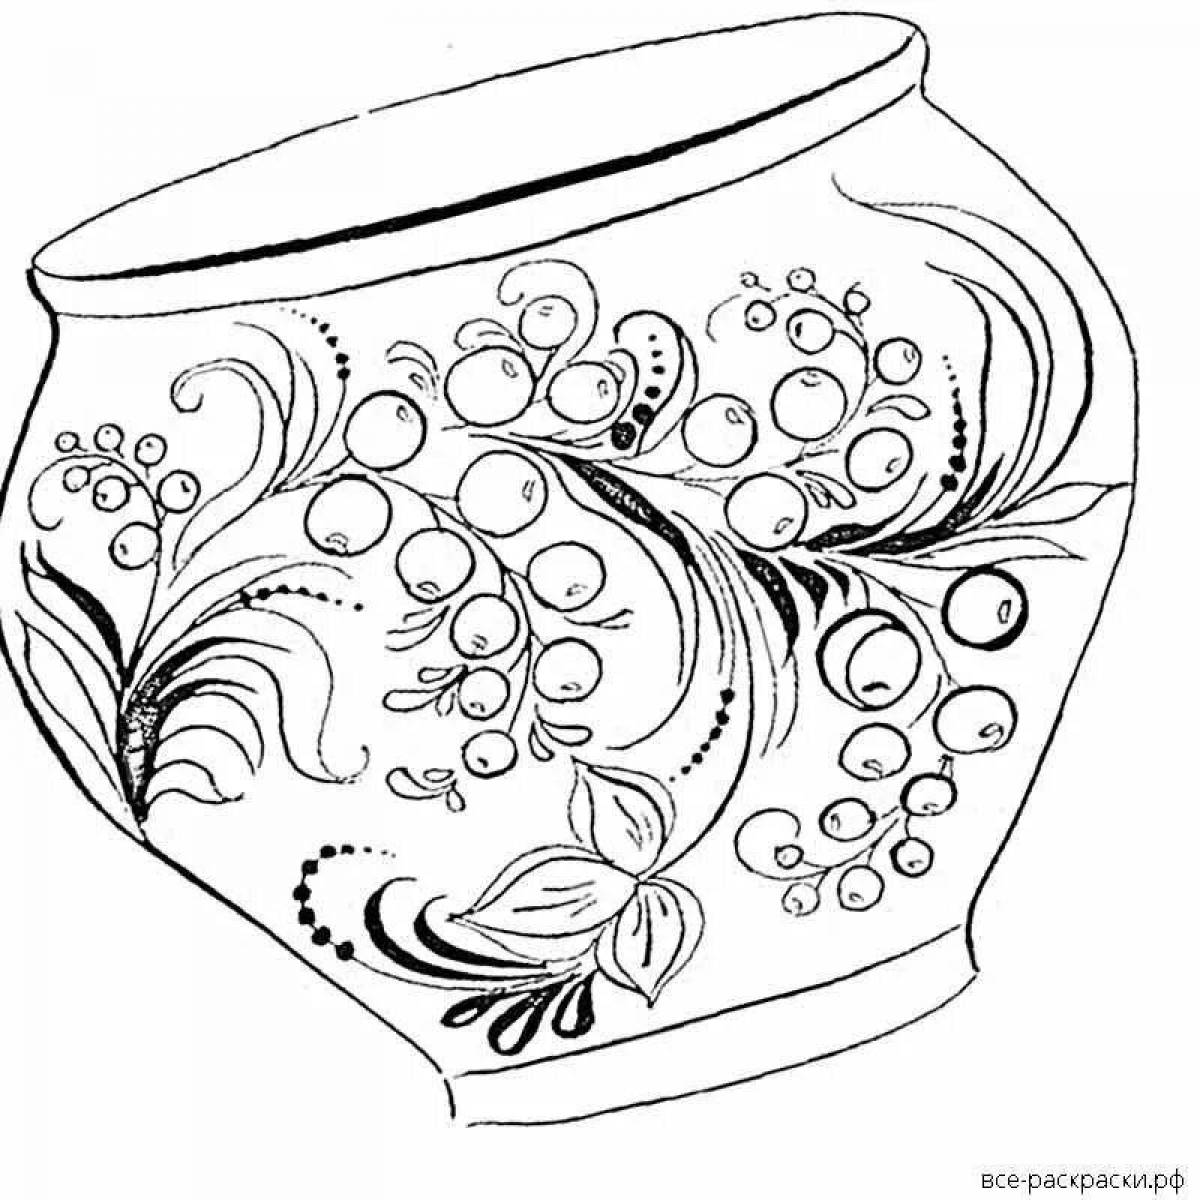 Great Gzhel plate coloring template